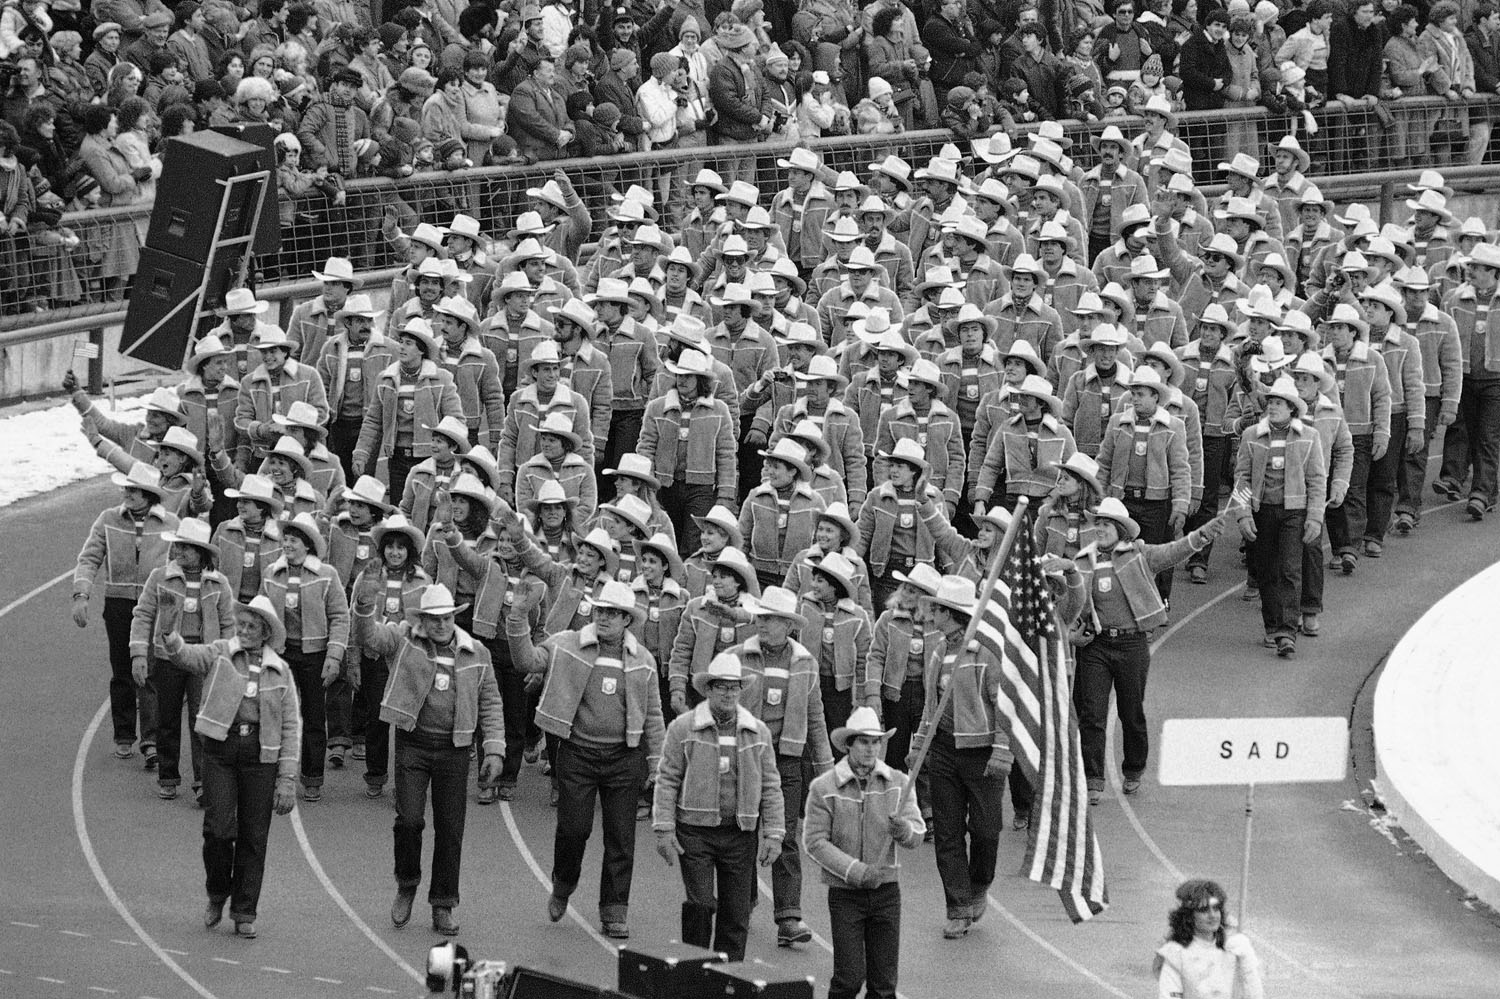 Luger Frank Masley carries the U.S. flag as he and his teammates march during the opening ceremonies of the 14th Winter Olympics in Sarajevo,Yugoslavia, Feb. 8, 1984.